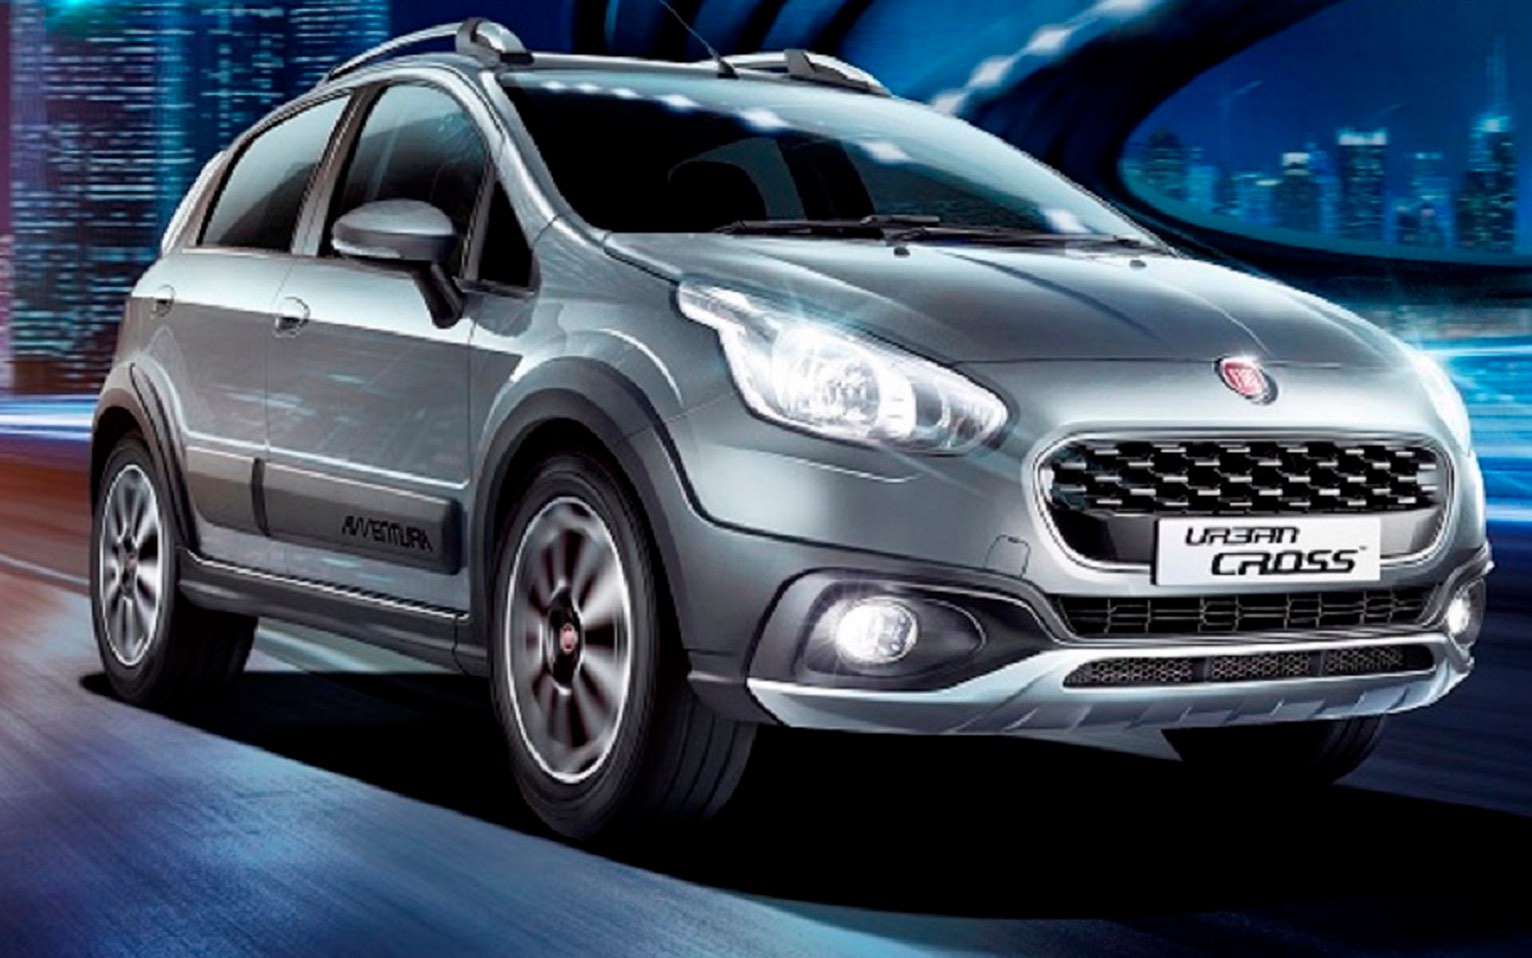 Fiat Avventura Urban Cross Launched at Rs 6.85 Lakh